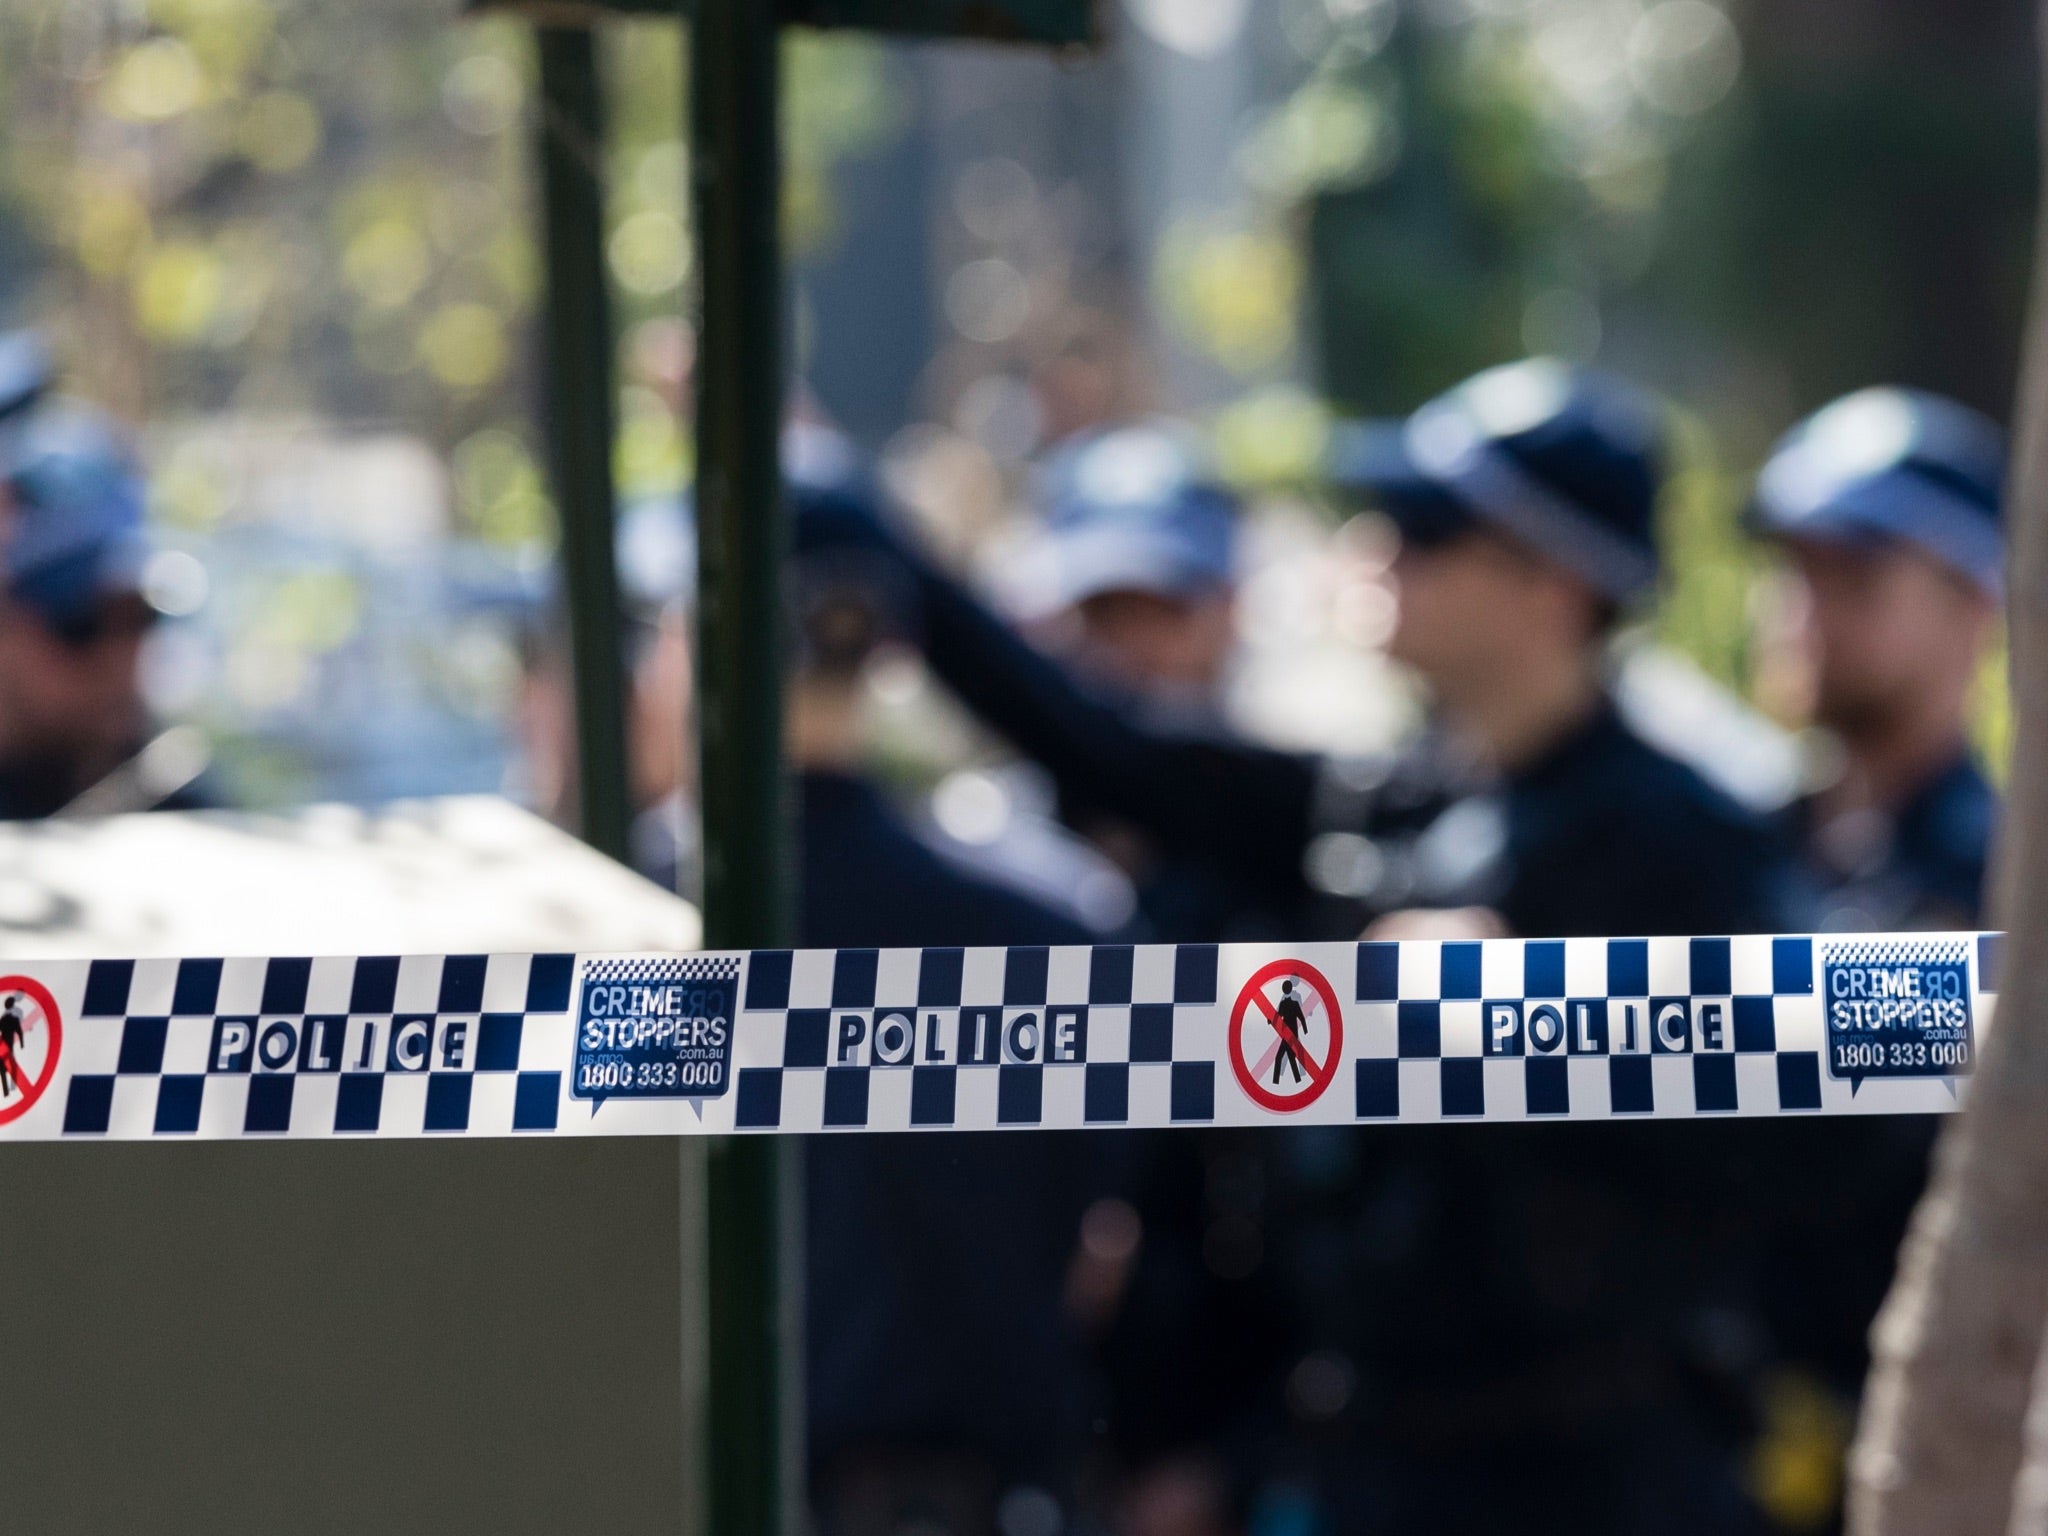 Violent crime with multiple victims is rare in Australia but this is the second major incident in Western Australia this year